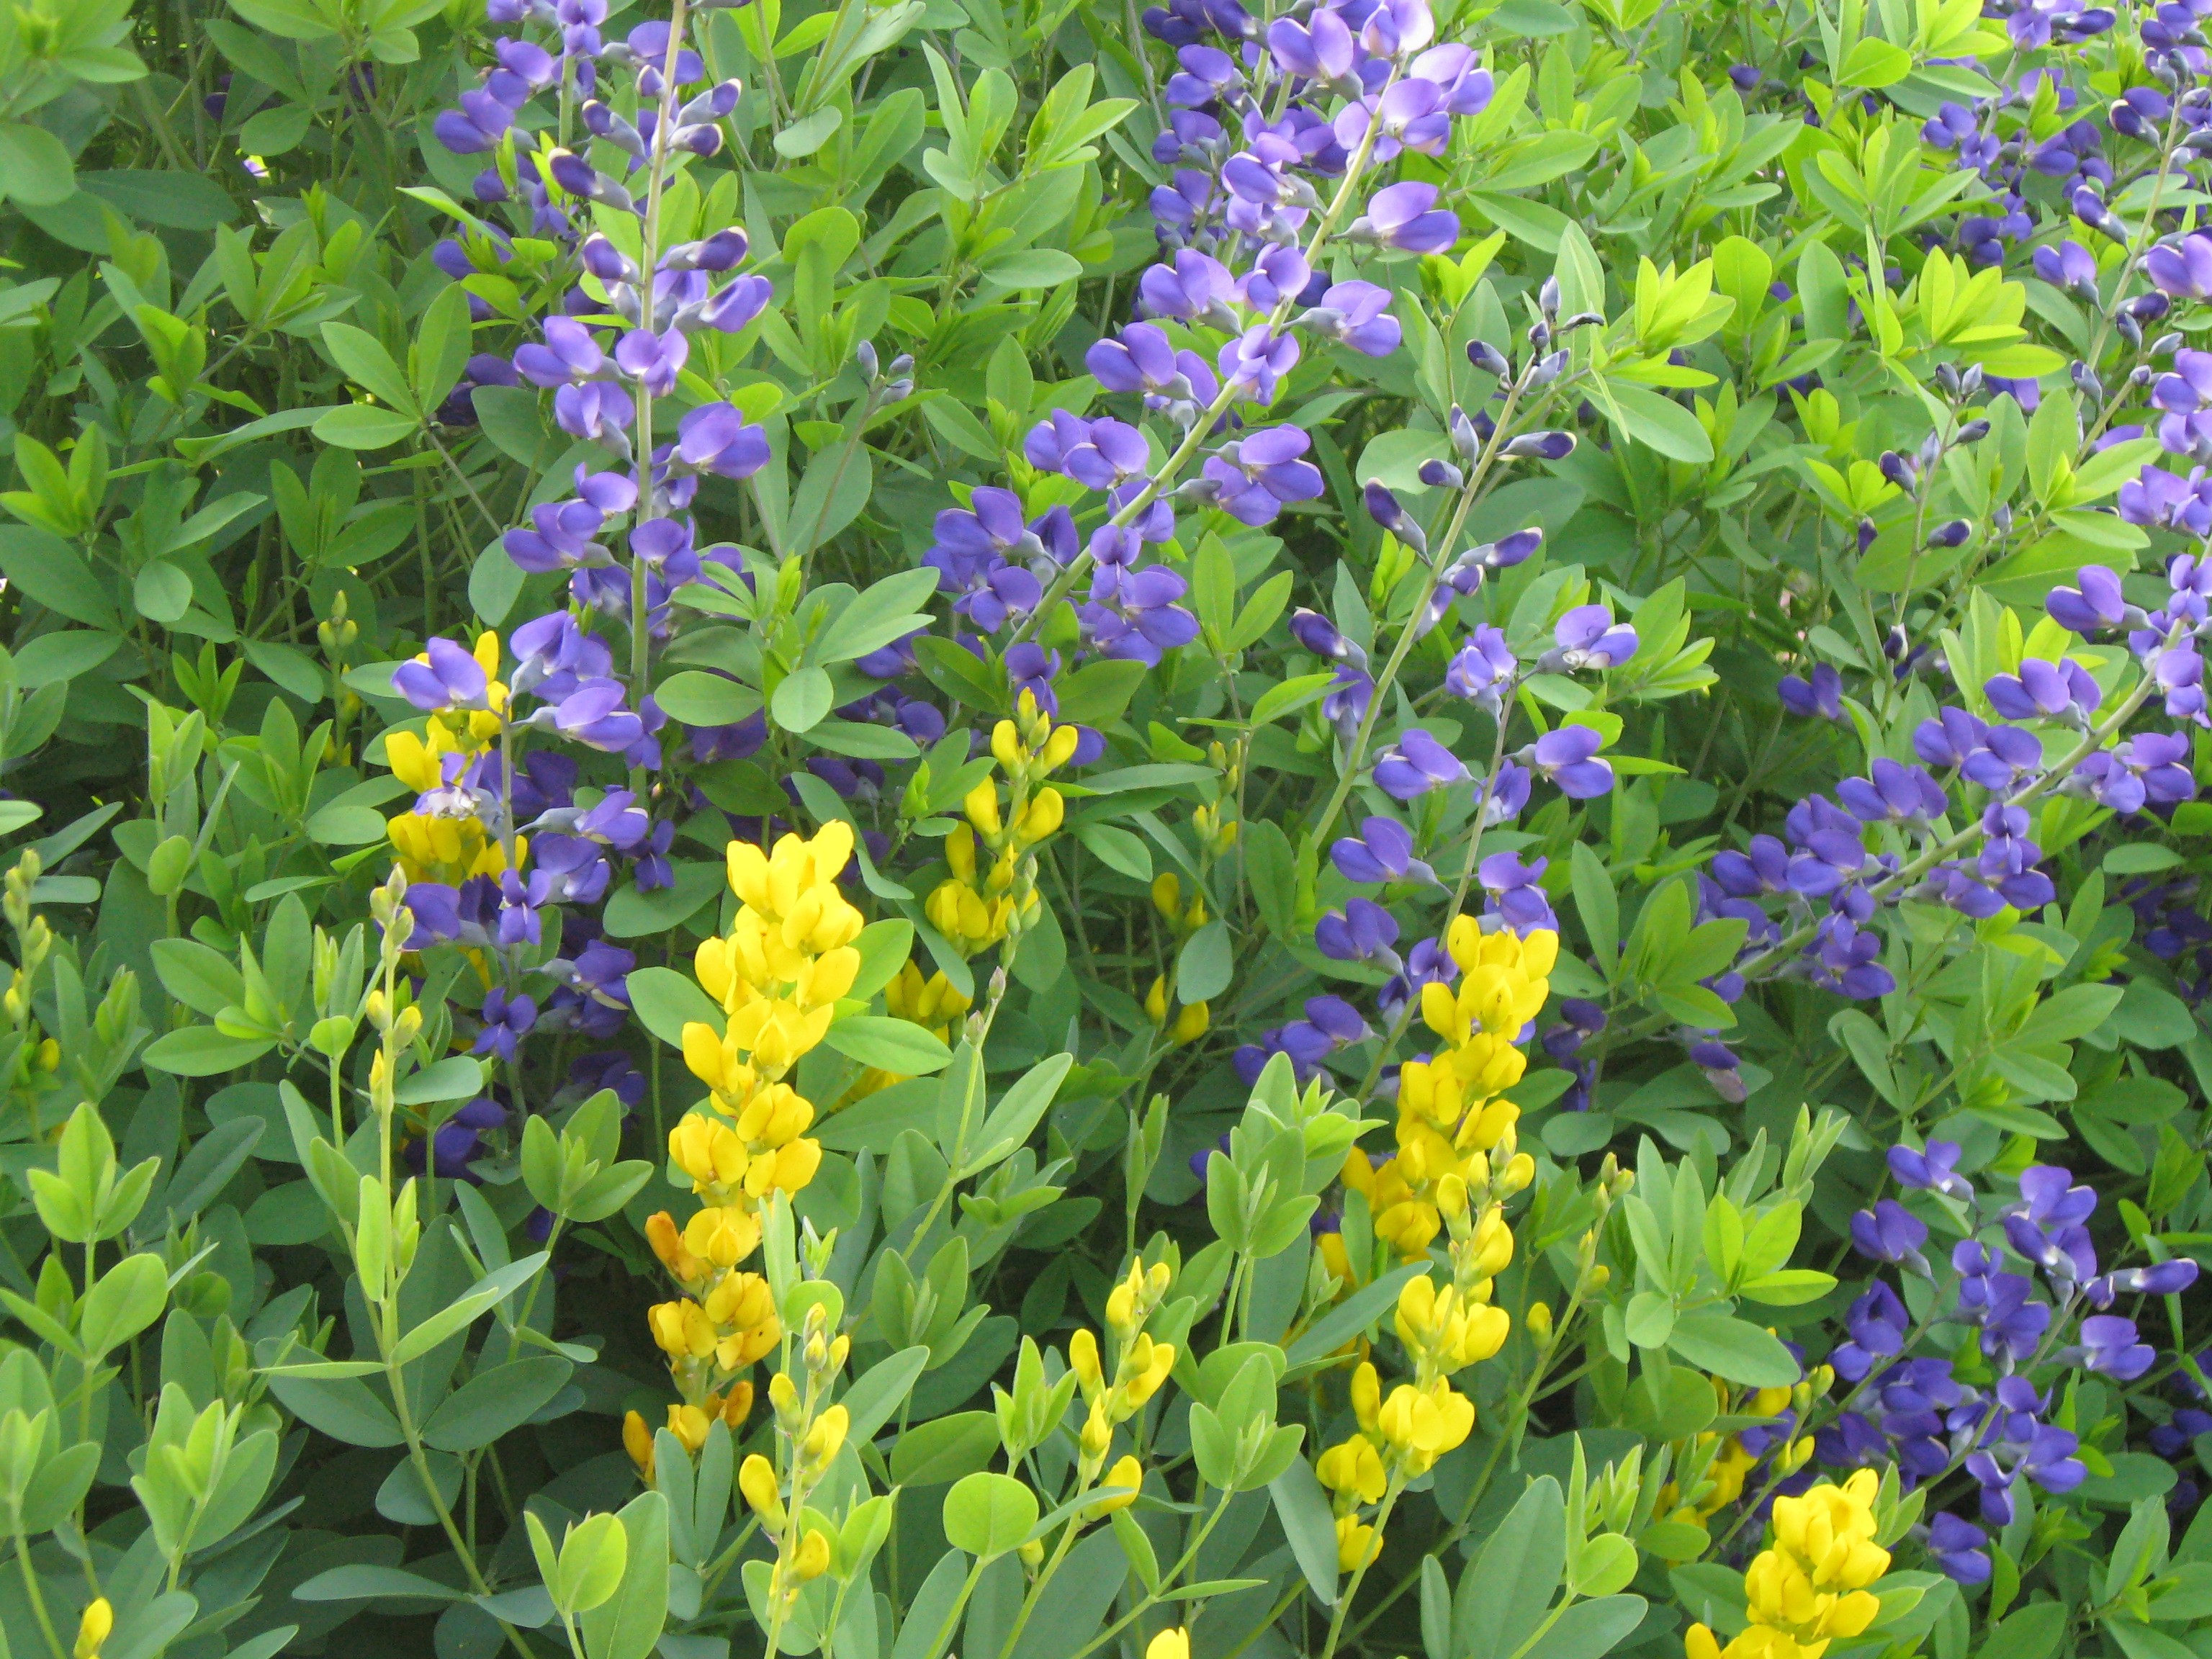 A green plant with yellow and blue colored flowers.